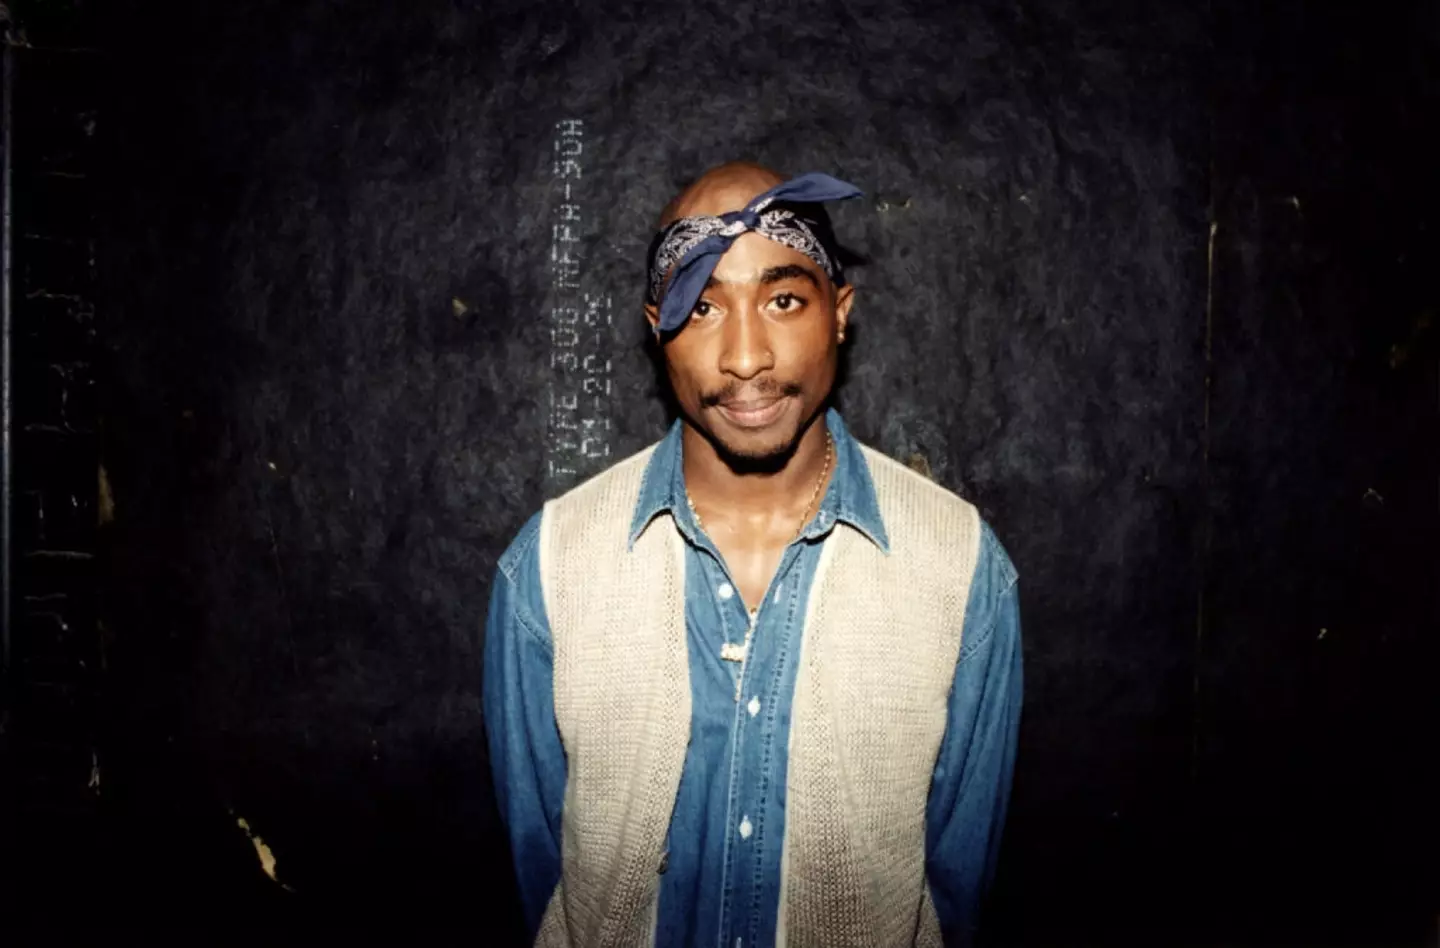 Tupac Shakur's final words have been revealed in court.